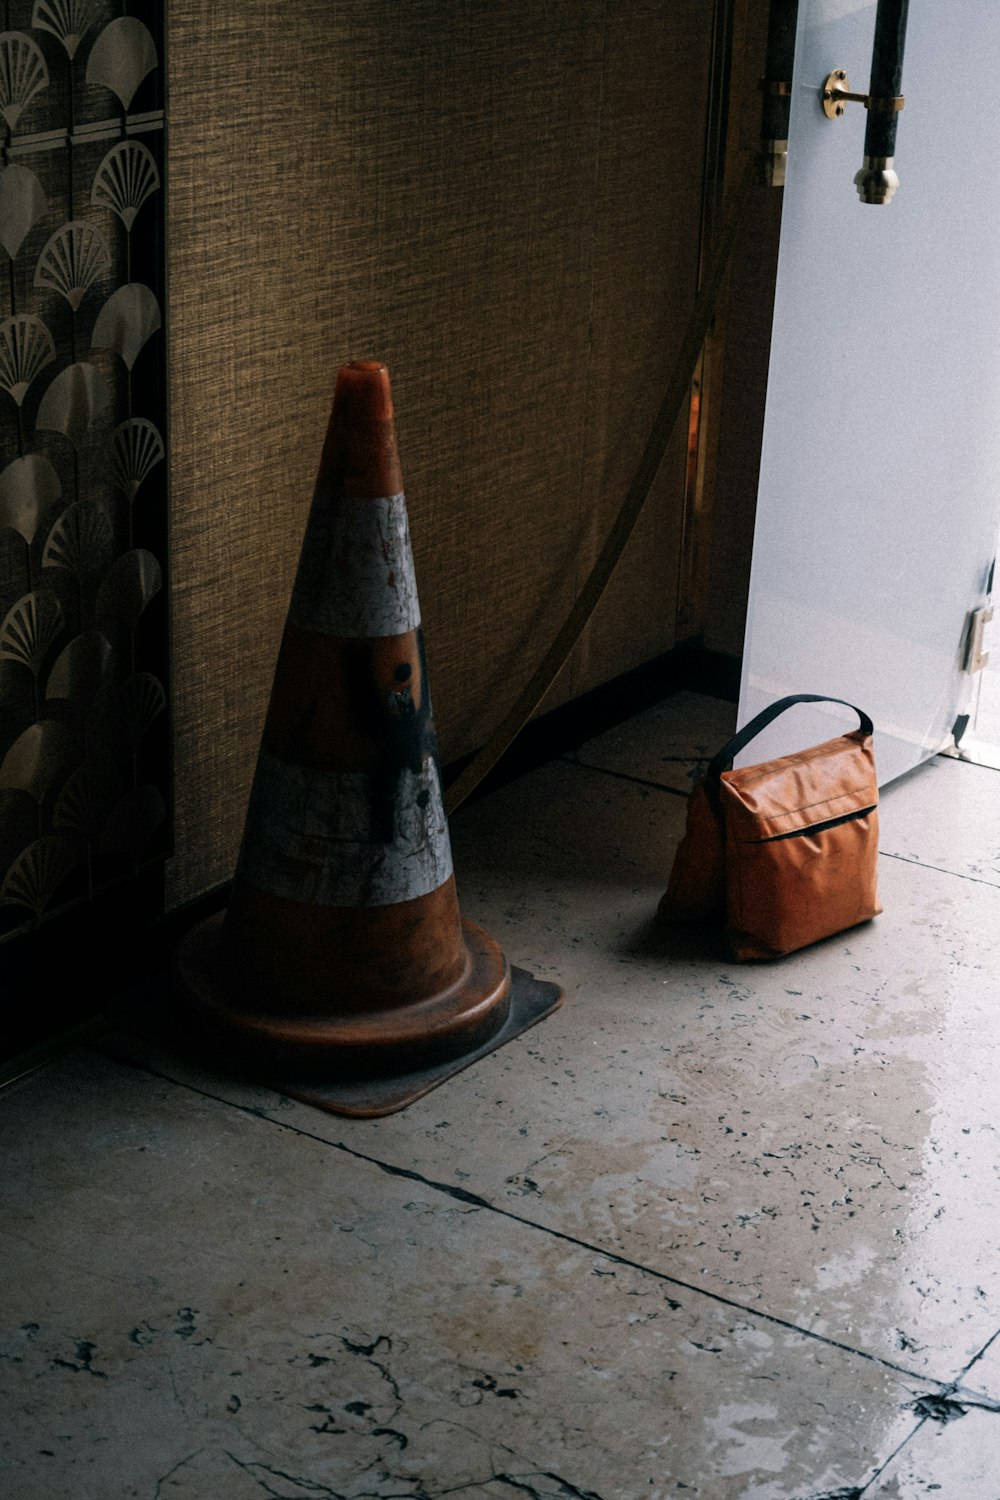 a traffic cone sitting on the floor next to a bag